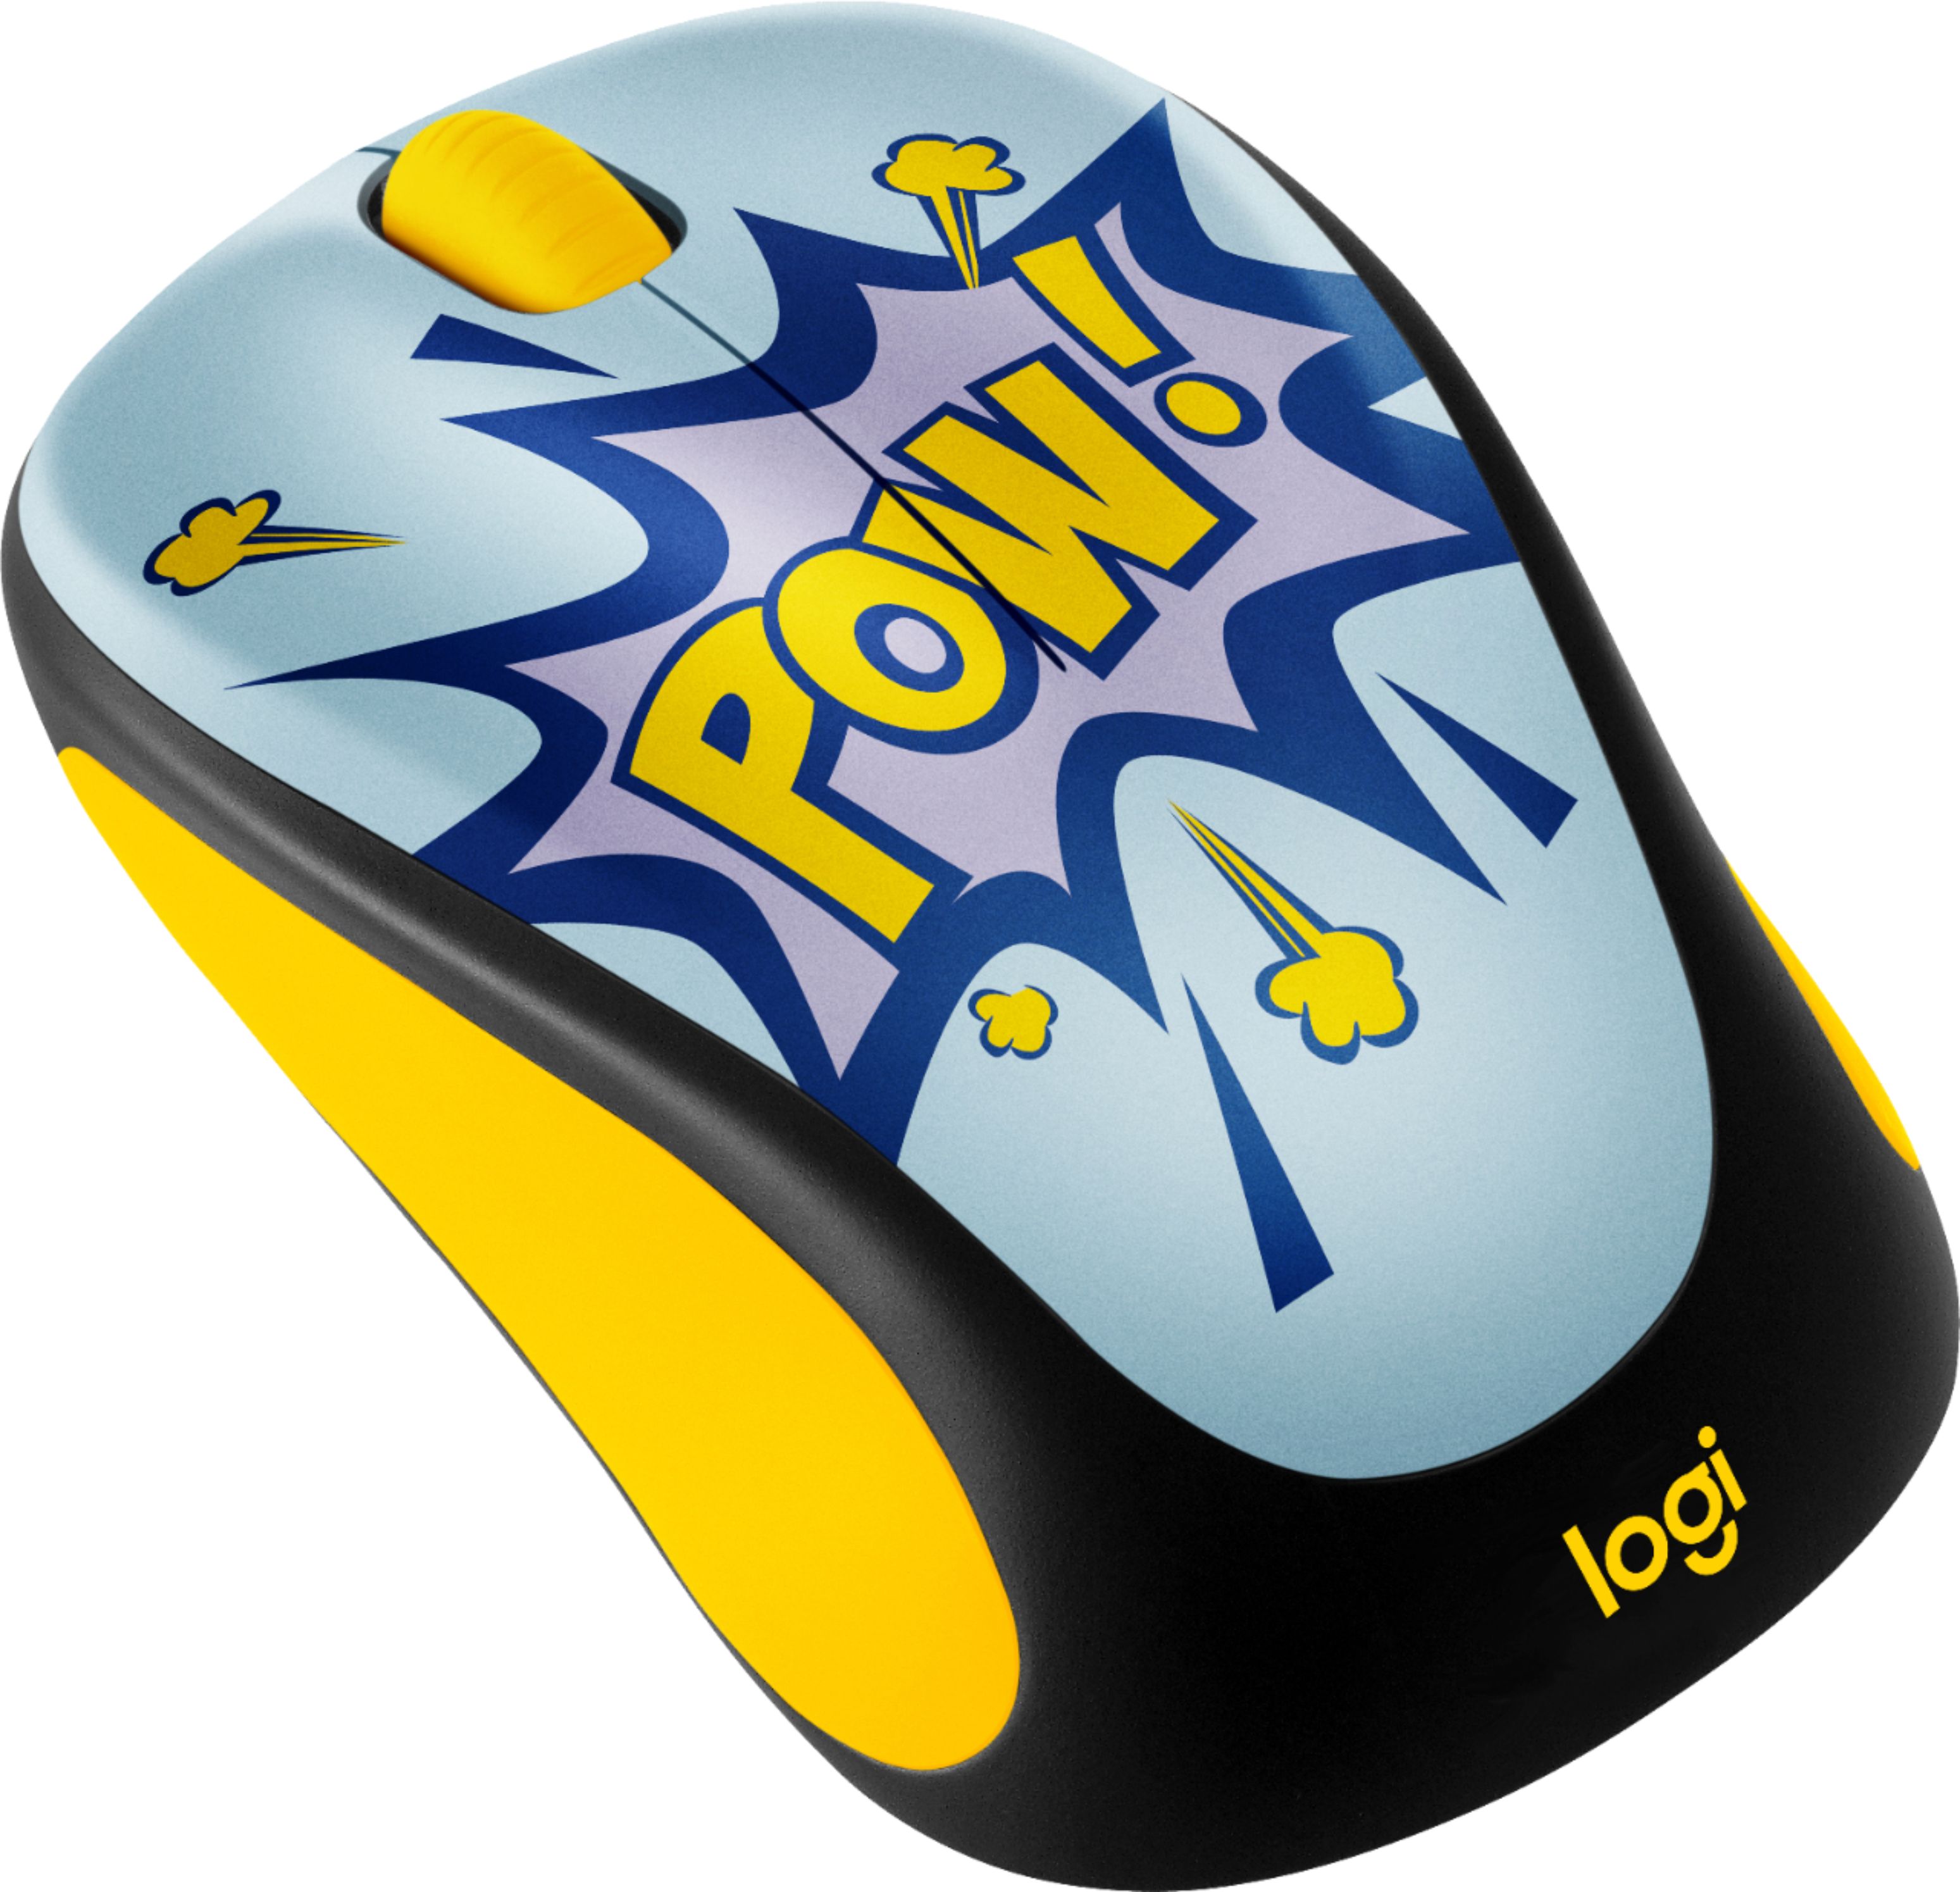 Angle View: Logitech - Design Collection Limited Edition Wireless 3-button Ambidextrous Mouse with Colorful Designs - POW